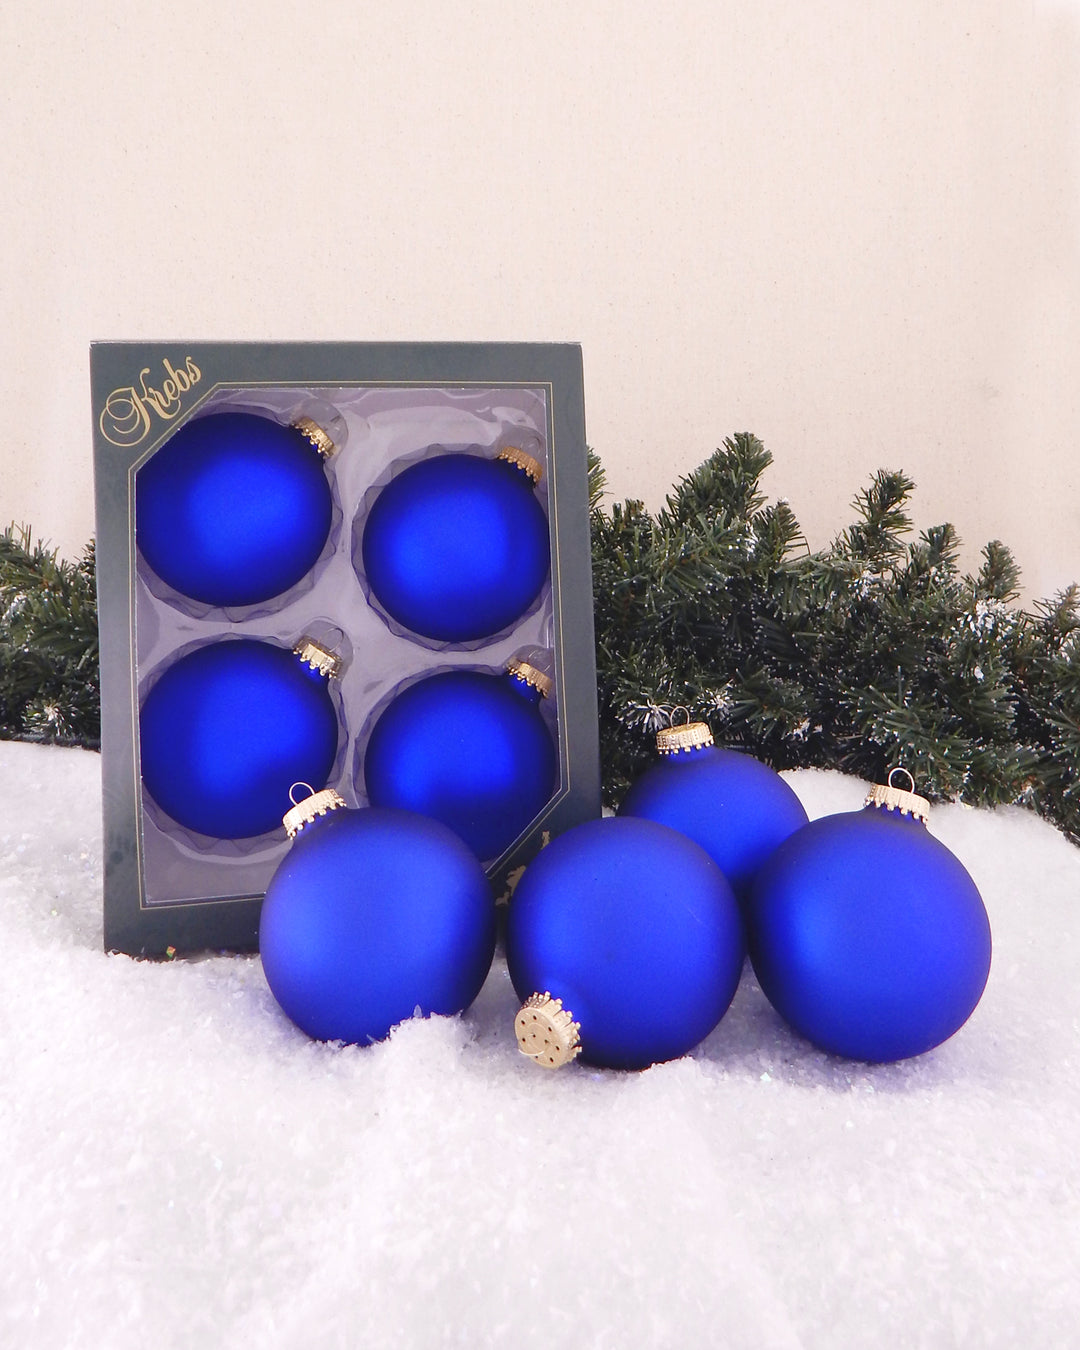 Glass Christmas Tree Ornaments - 80mm / 3.25" [4 Pieces] Designer Balls from Christmas By Krebs Seamless Hanging Holiday Decor (Velvet Blue)